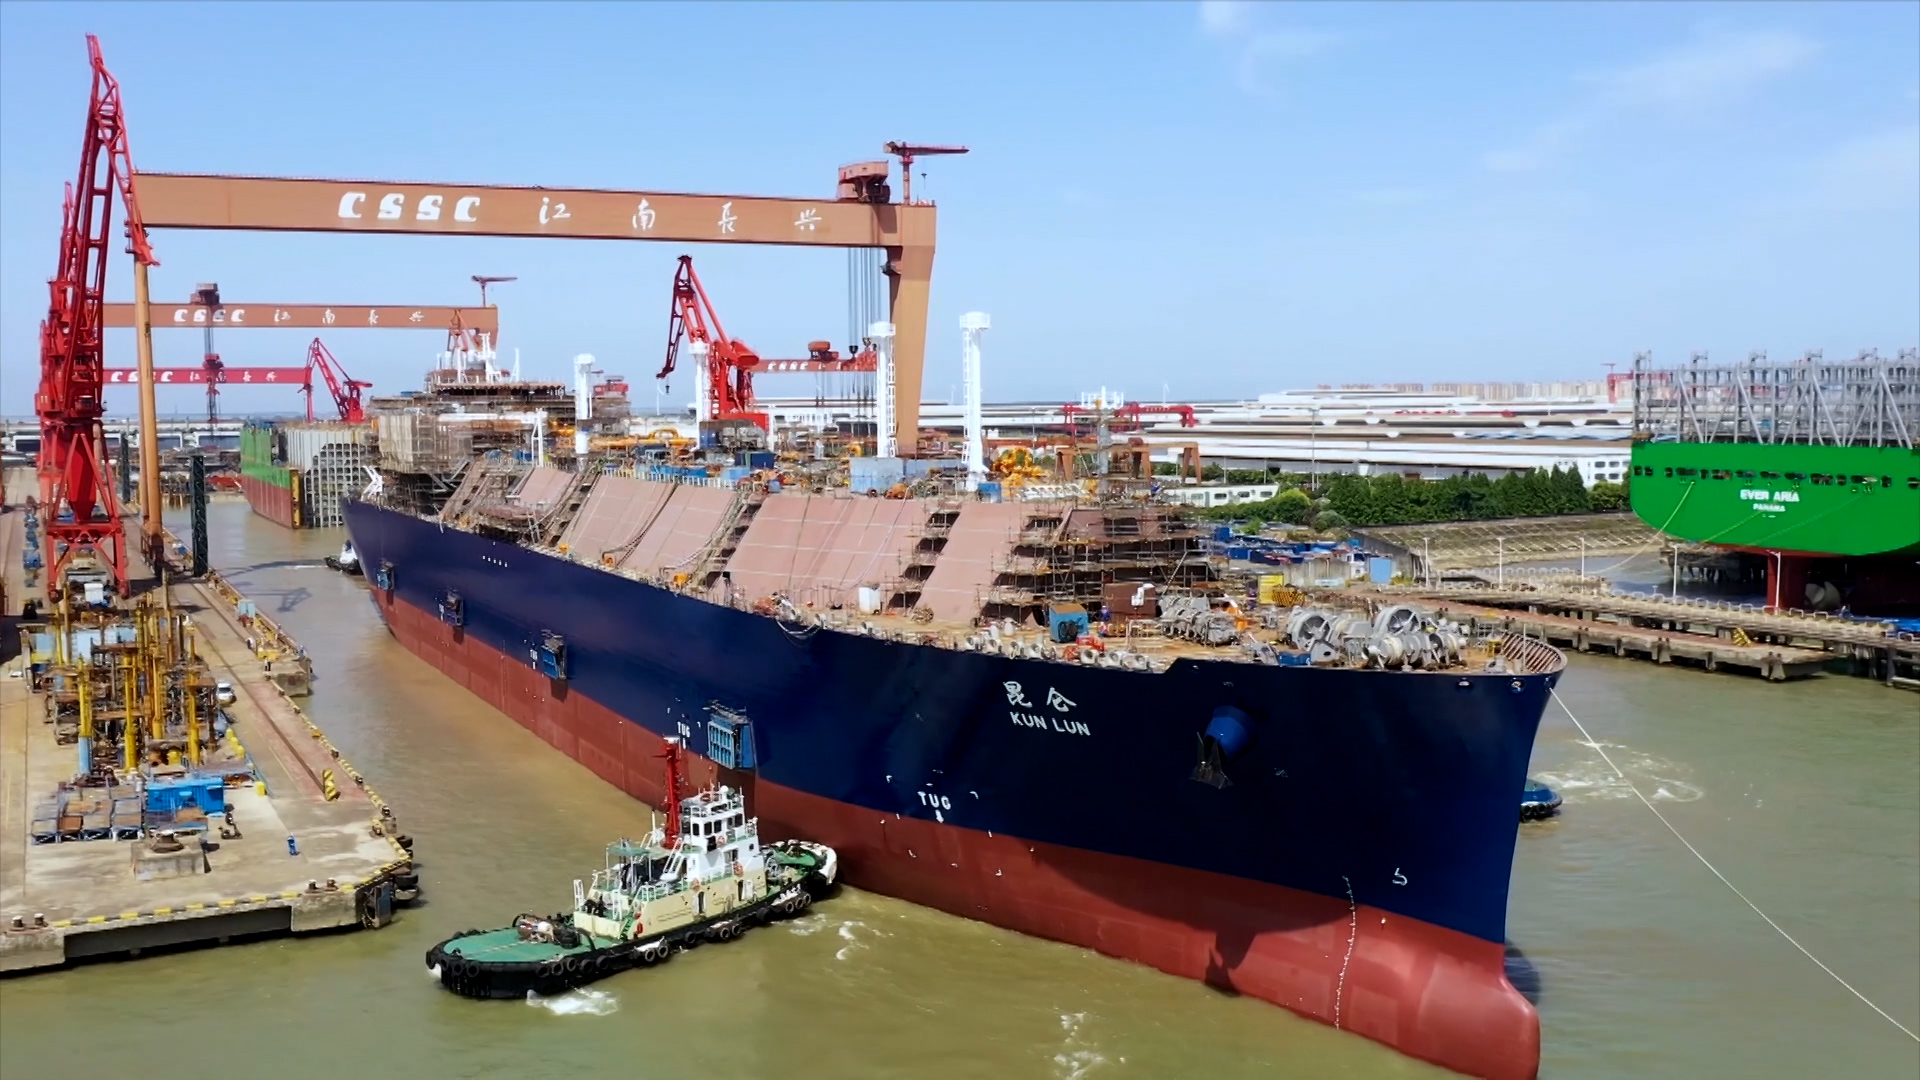 A ship is being built at a shipyard in Shanghai, China. /CMG